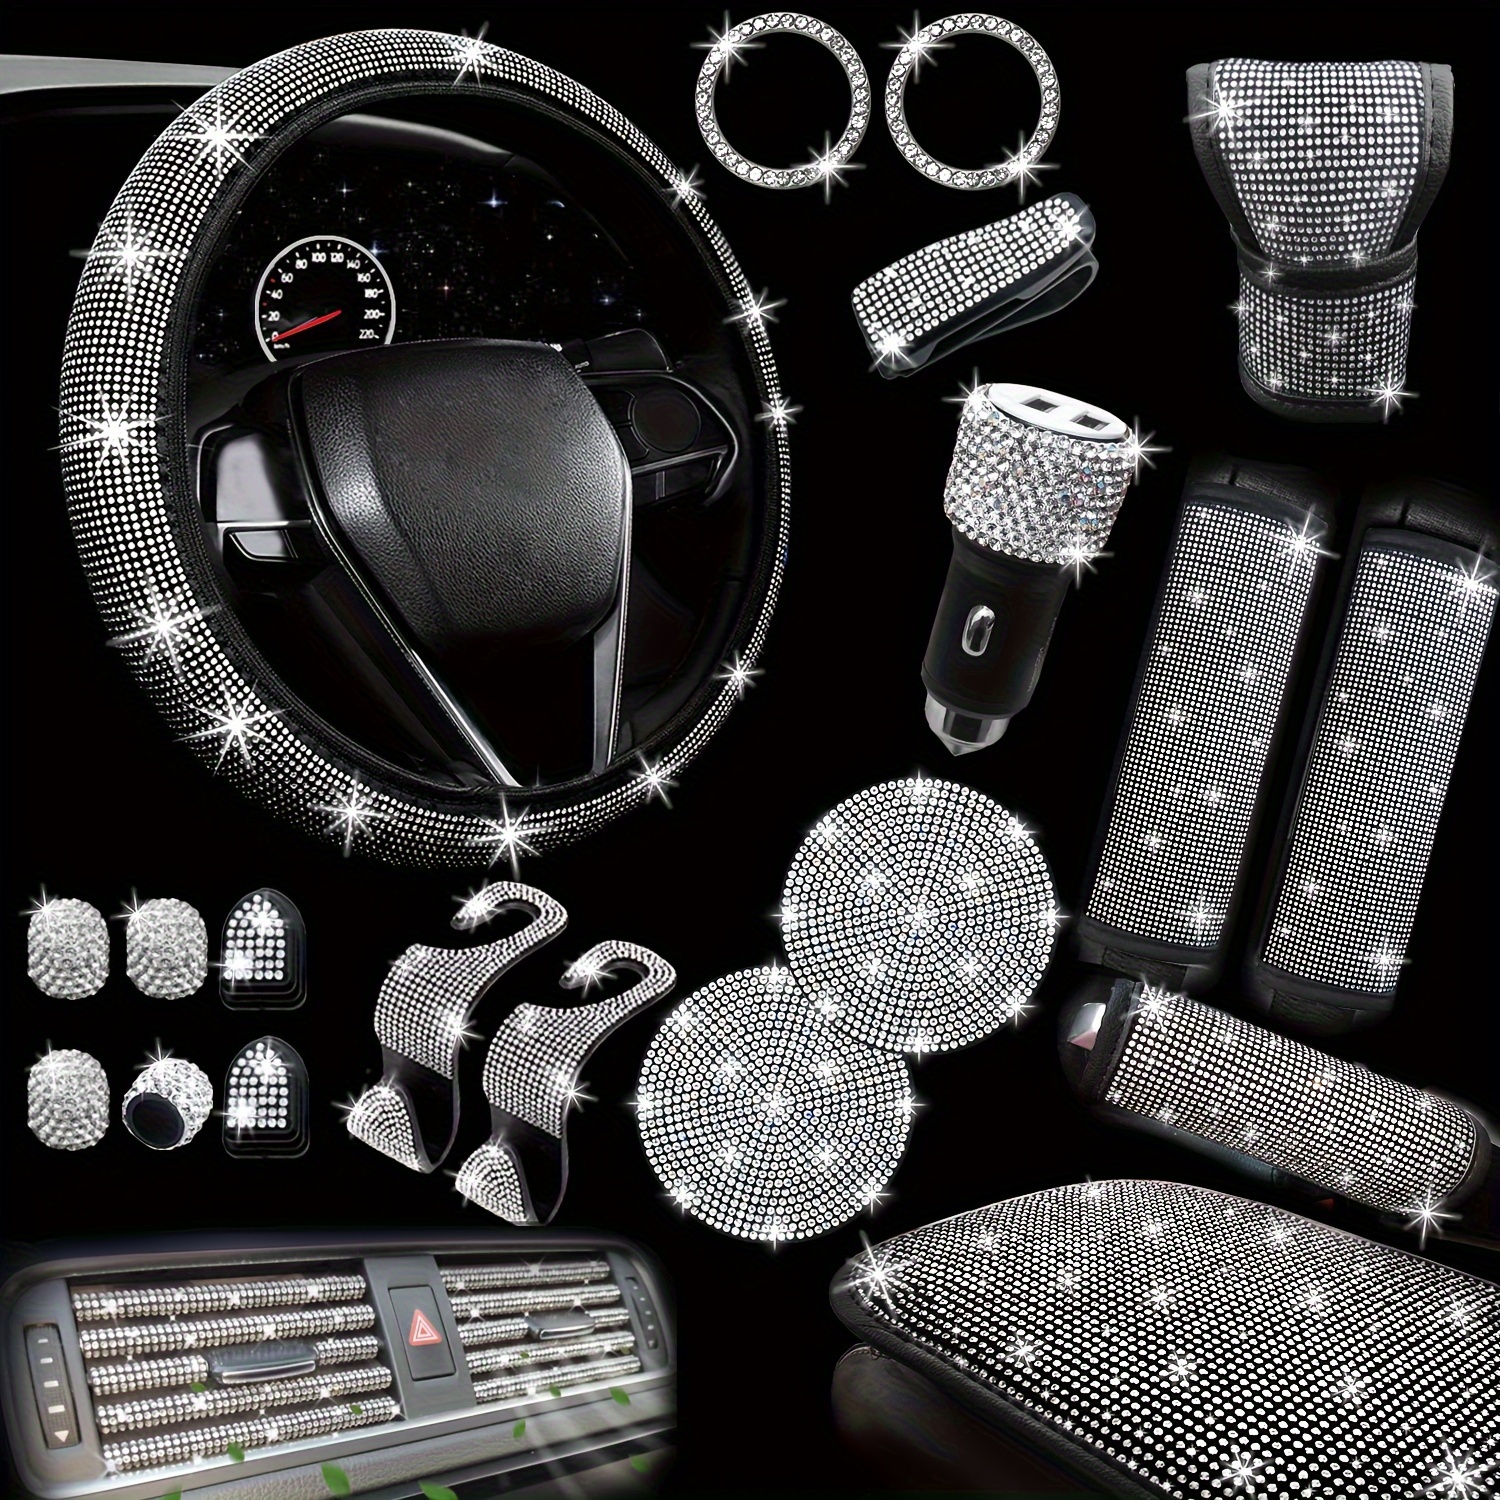 

30 Pcs Bling Car Accessories Set For Women, Steering Wheel Covers Universal Fit 15 Inch, Seat Belt Covers, Armrest Cover, Gear Shift Covers